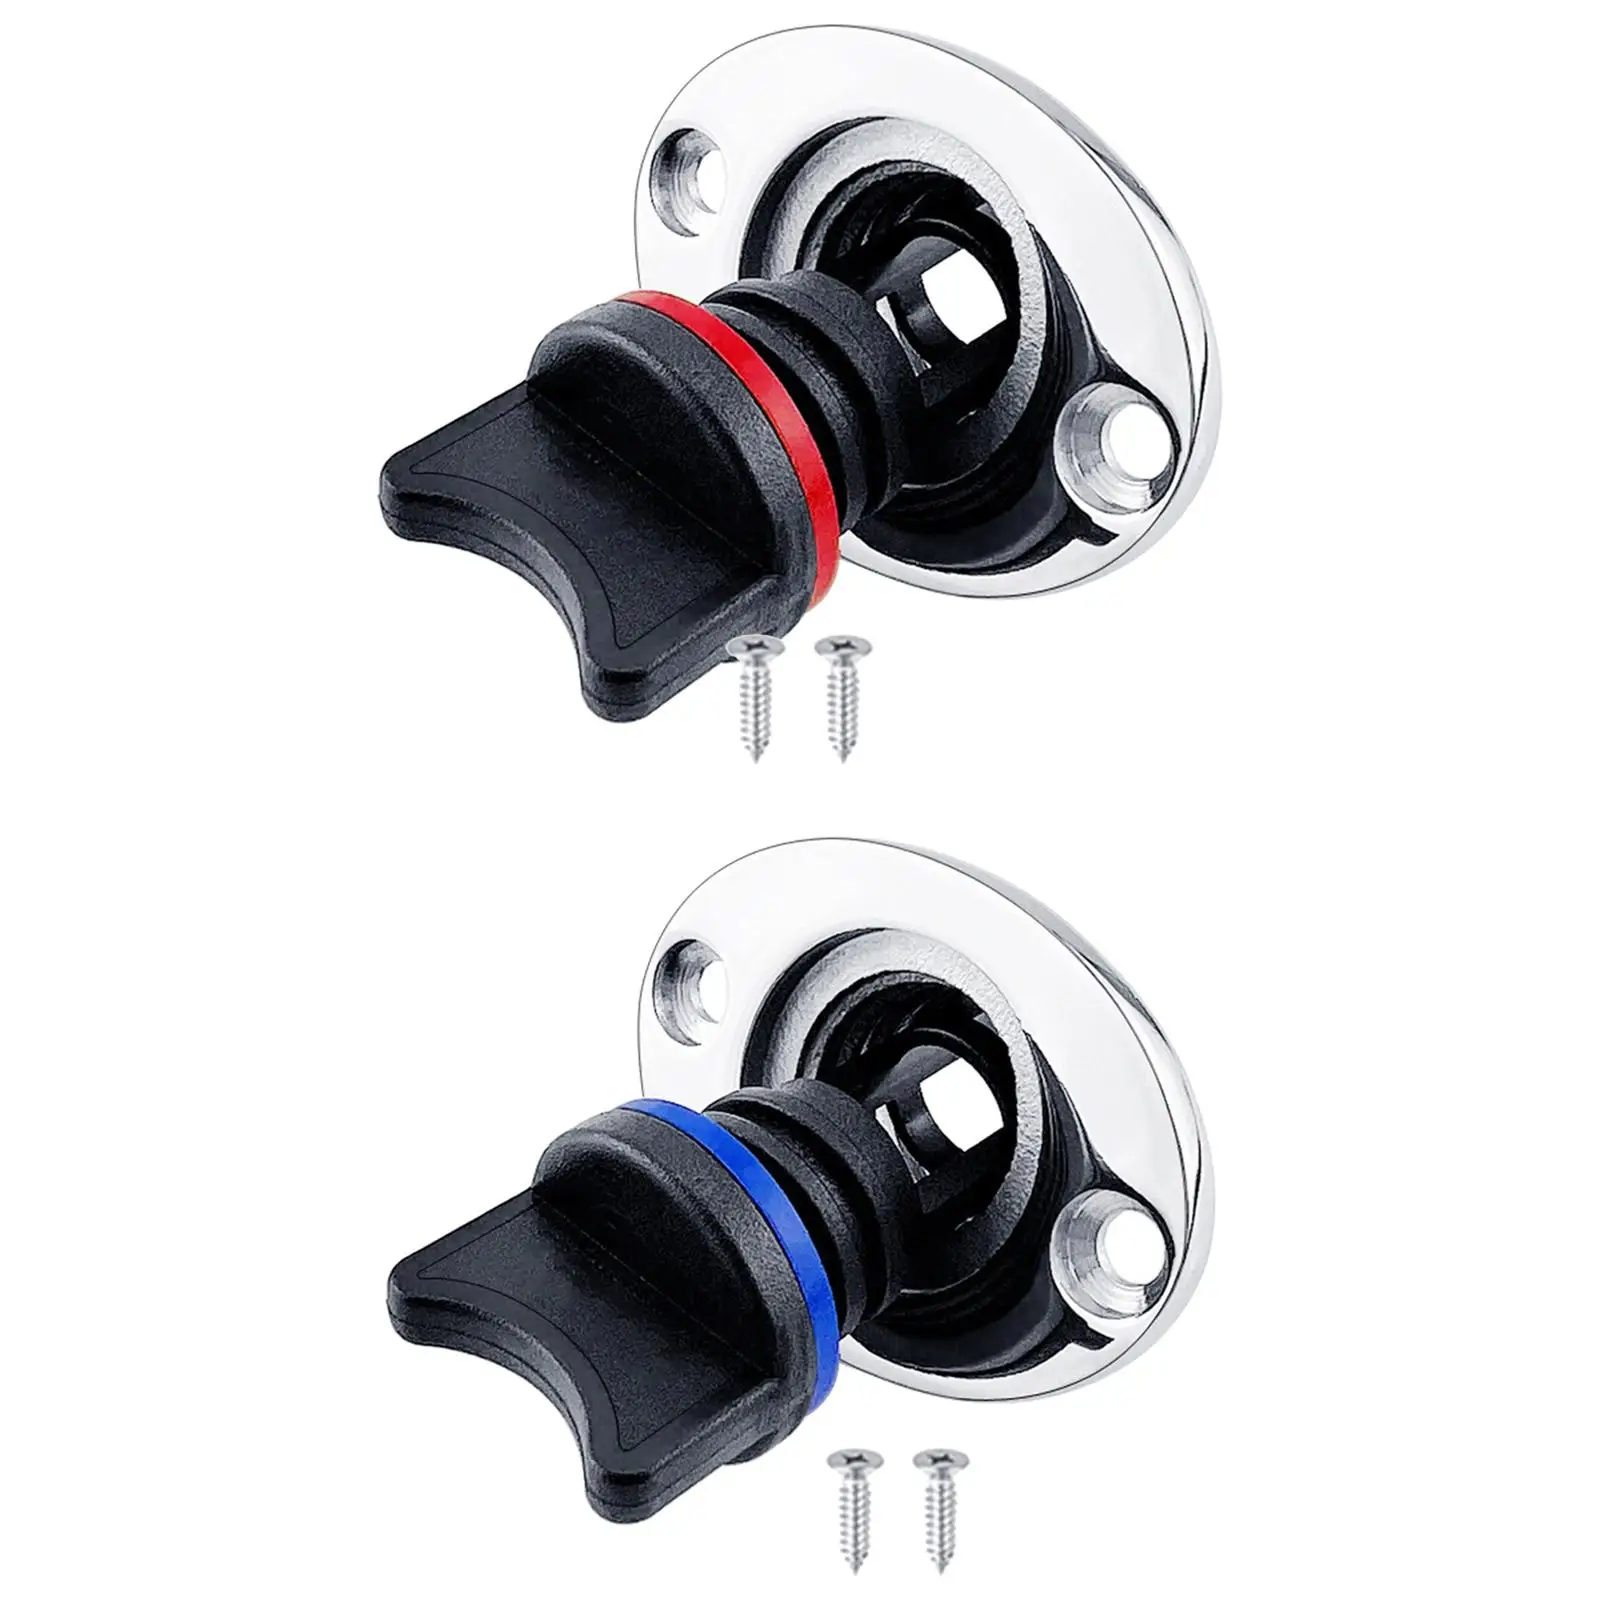 Boat Drain Plug Replacement Transom Hull Drain for 25mm 1`` Hole 3/4`` Thread Marine Boat Yacht Kayak Canoe Accessory